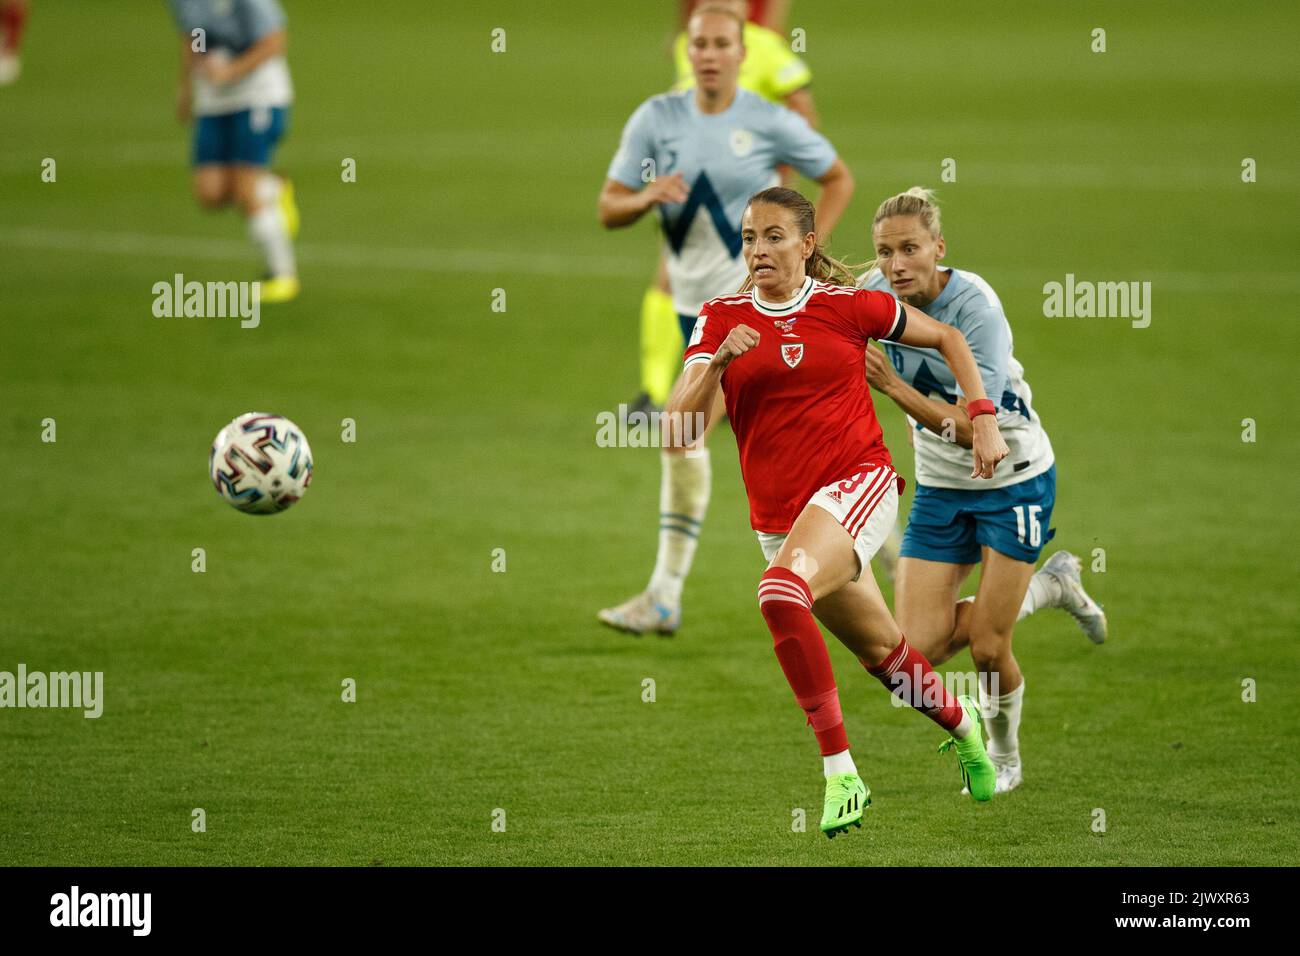 Cardiff, UK. 6th Sep, 2022. Kayleigh Green of Wales chases after the ball, chased by Kaja Eržen of Slovenia during the Wales v Slovenia Women's World Cup Qualification match. Credit: Gruffydd Thomas/Alamy Live News Stock Photo